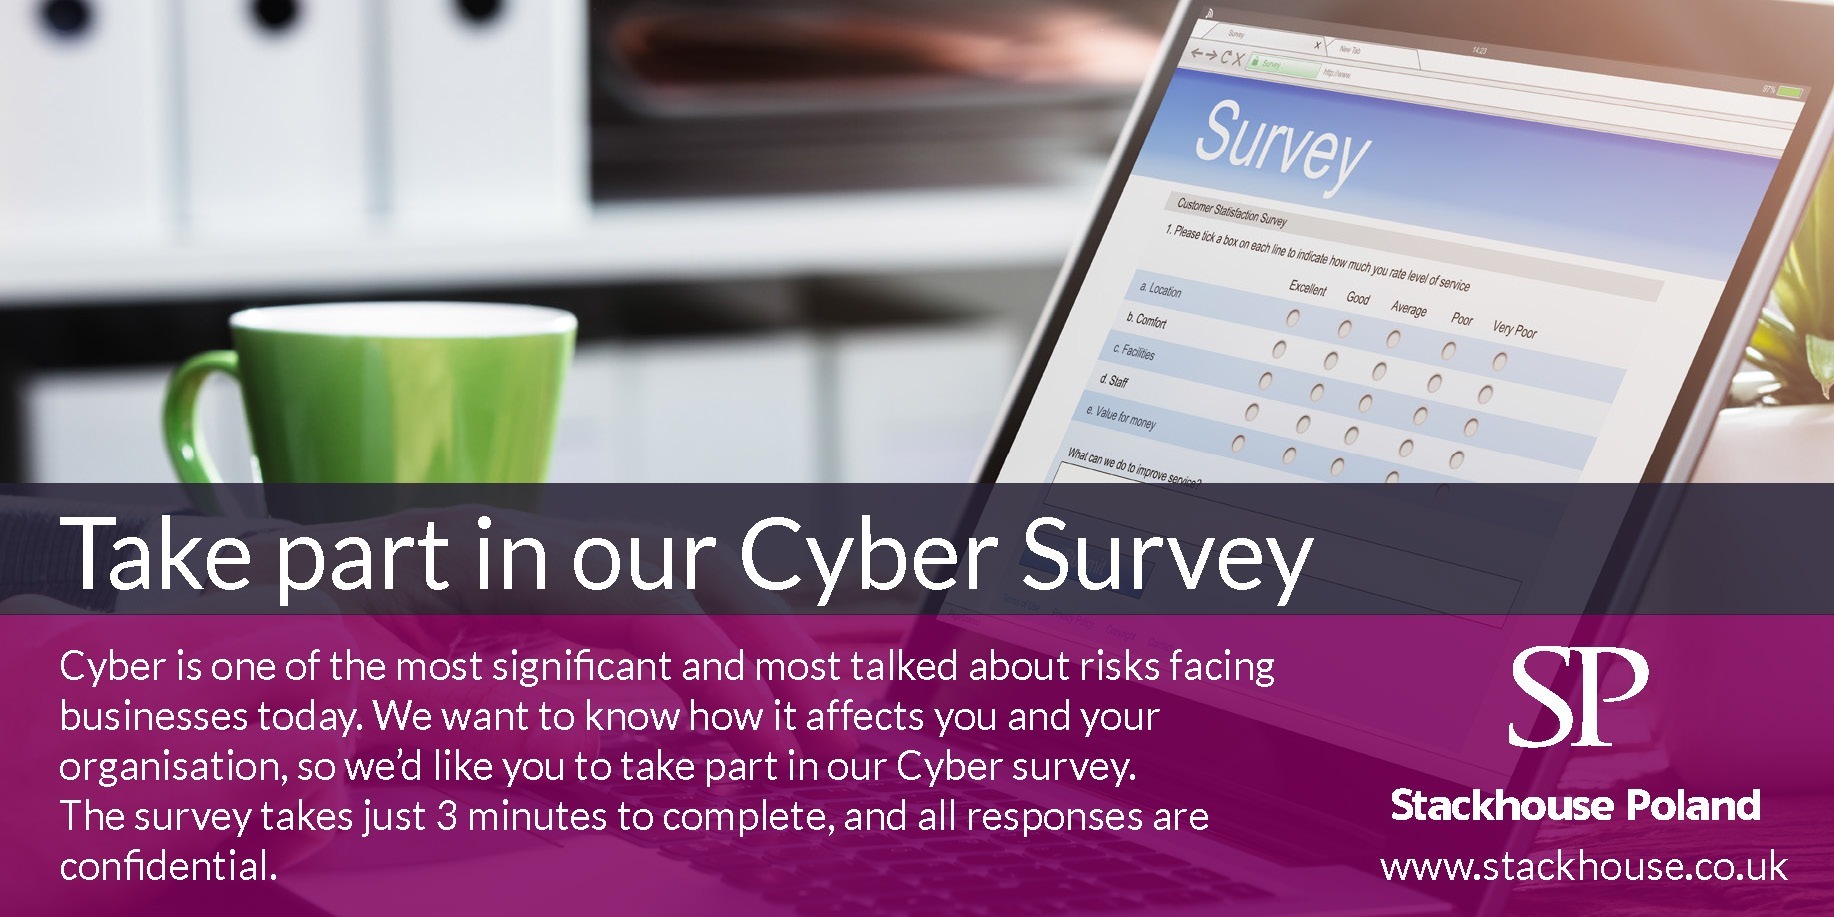 Award winning Stackhouse Poland urge businesses to take part in Cyber Security survey